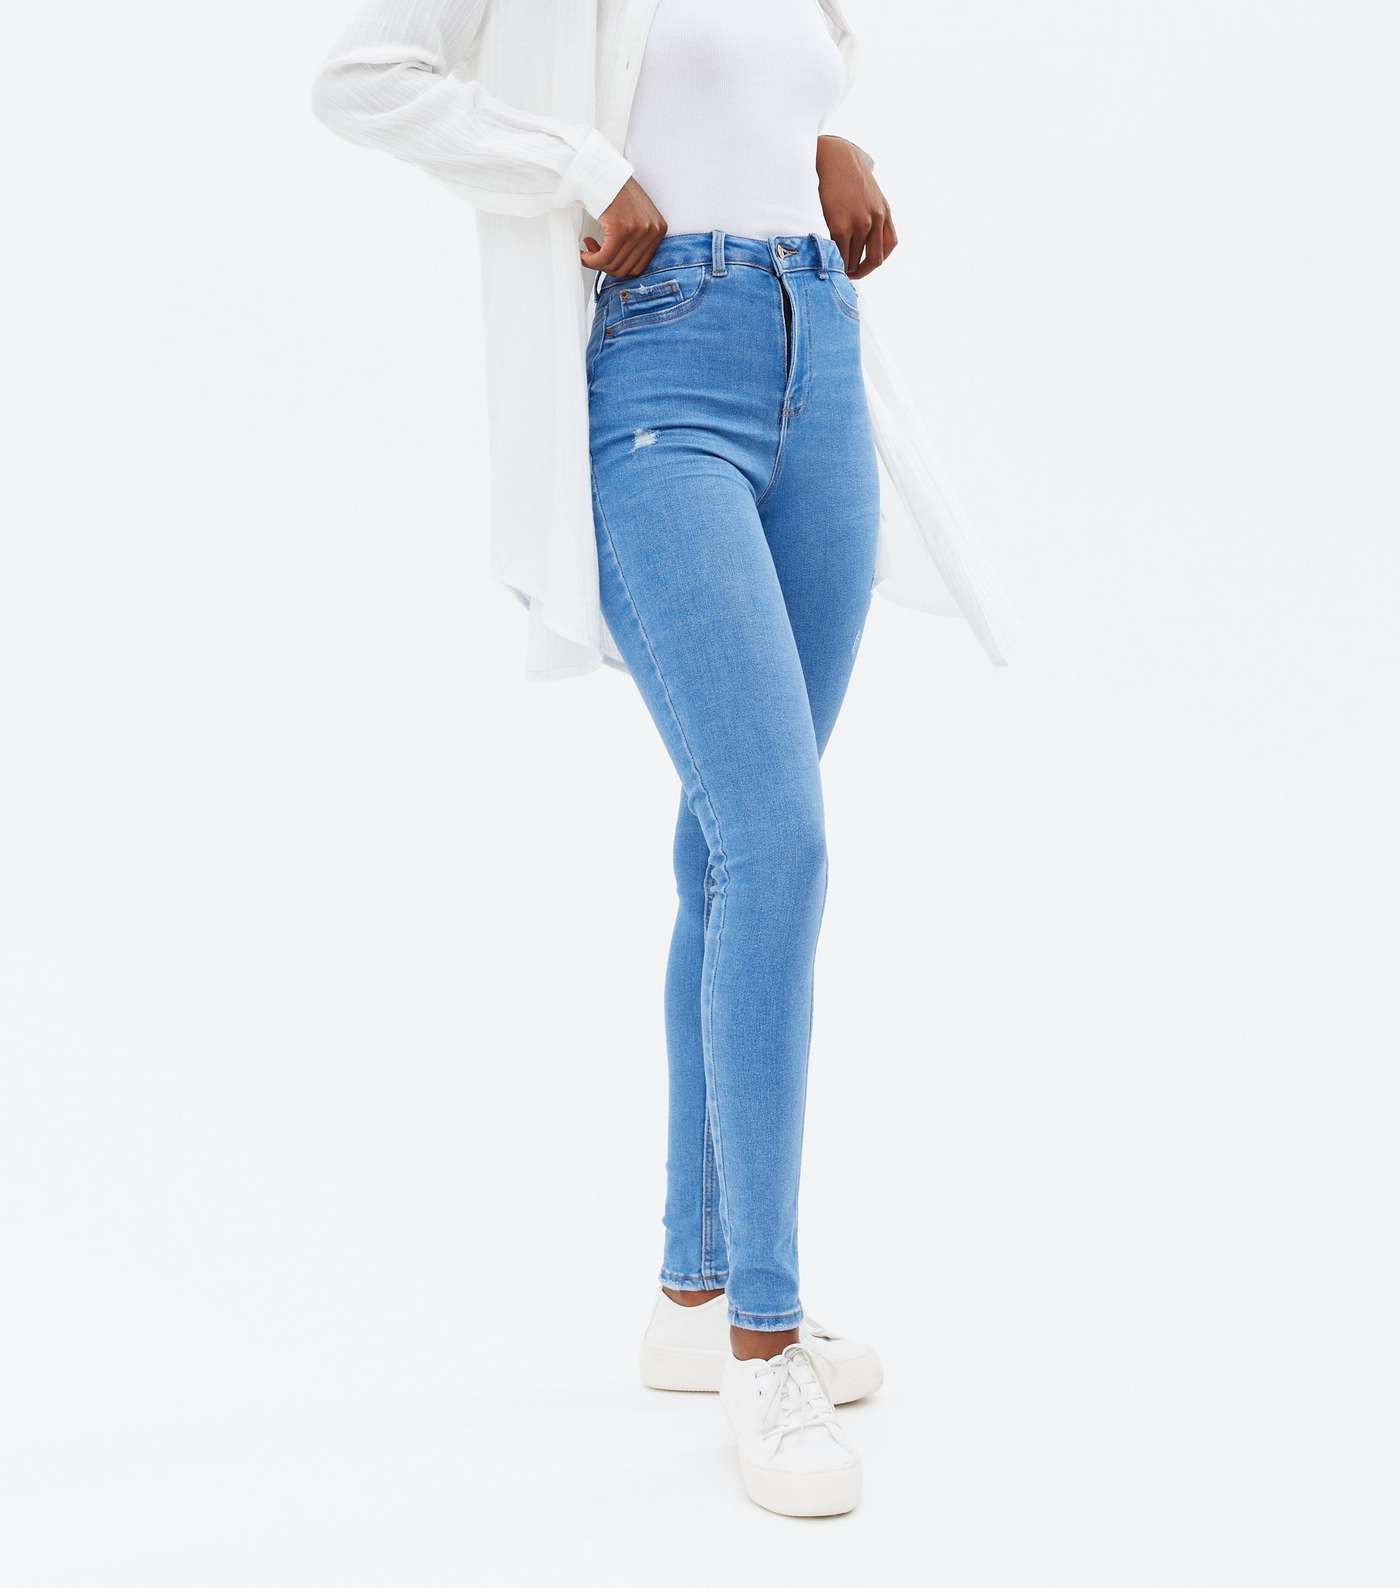 Tall Bright Blue Ripped High Waist Hallie Super Skinny Jeans Image 2